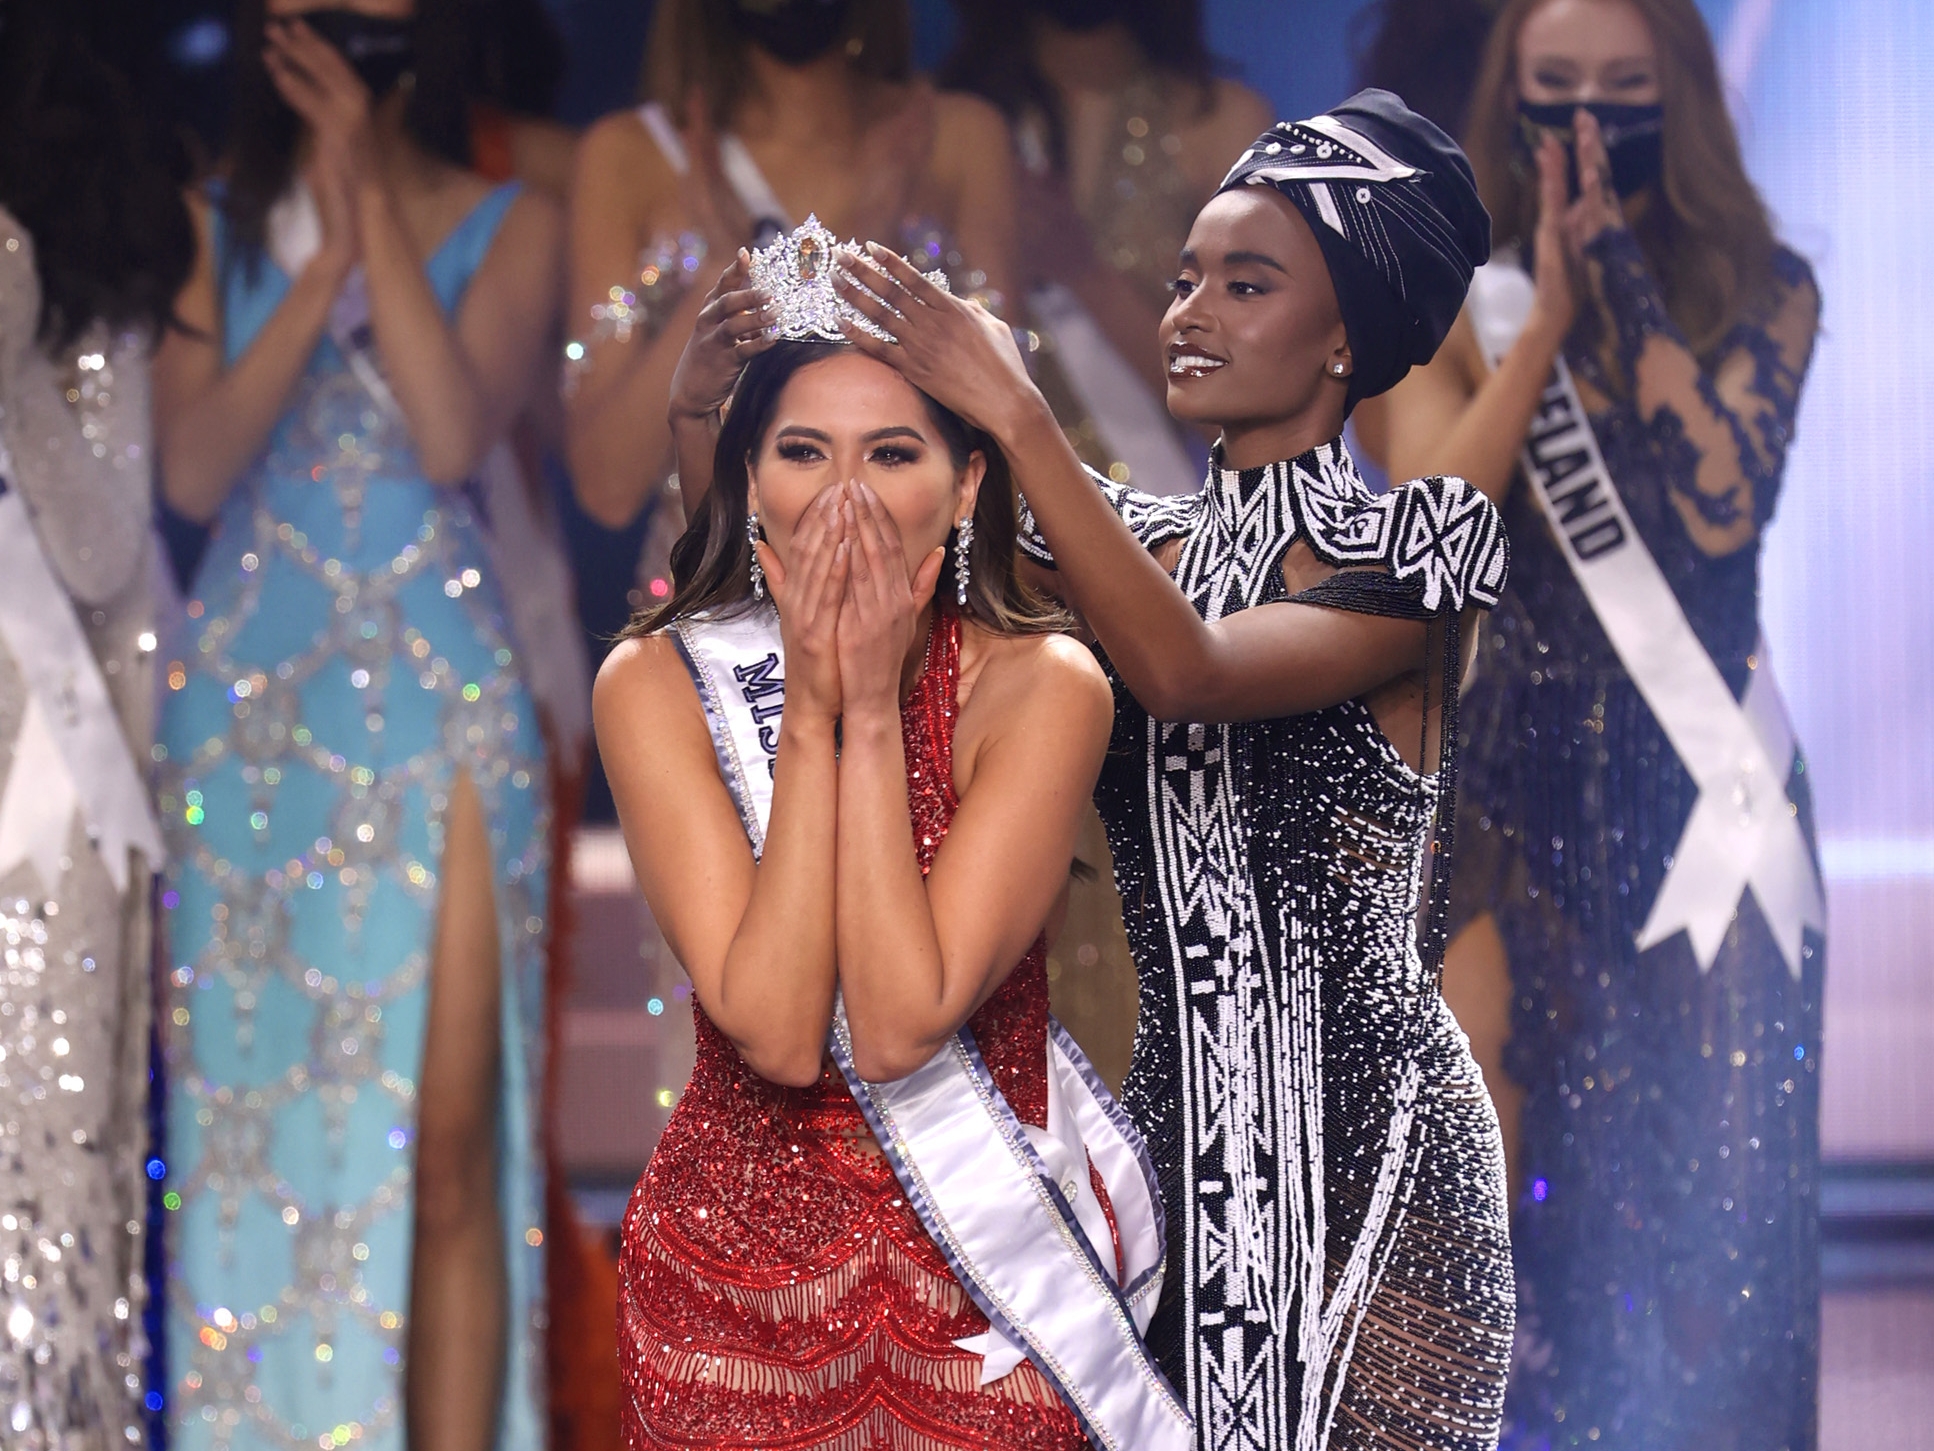 HOLLYWOOD, FLORIDA - MAY 16: Miss Mexico Andrea Meza is crowned Miss Universe 2021 onstage at the Miss Universe 2021 Pageant at Seminole Hard Rock Hotel & Casino on May 16, 2021 in Hollywood, Florida.   Rodrigo Varela/Getty Images/AFP (Photo by Rodrigo Varela / GETTY IMAGES NORTH AMERICA / Getty Images via AFP)